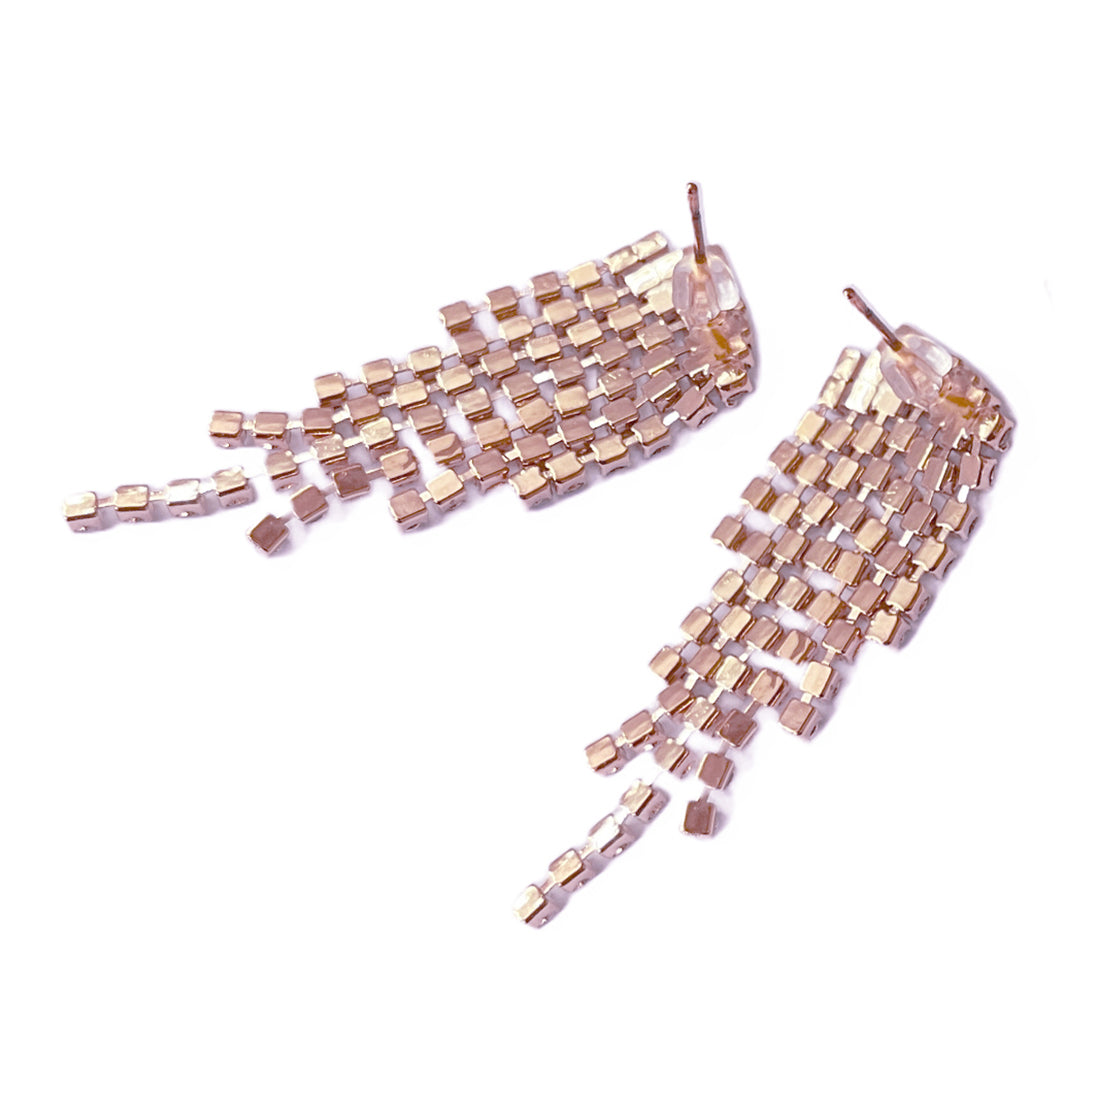 Contemporary White Diamante Crystal Studded Rose Gold-Toned Short Tassel Drop Earrings